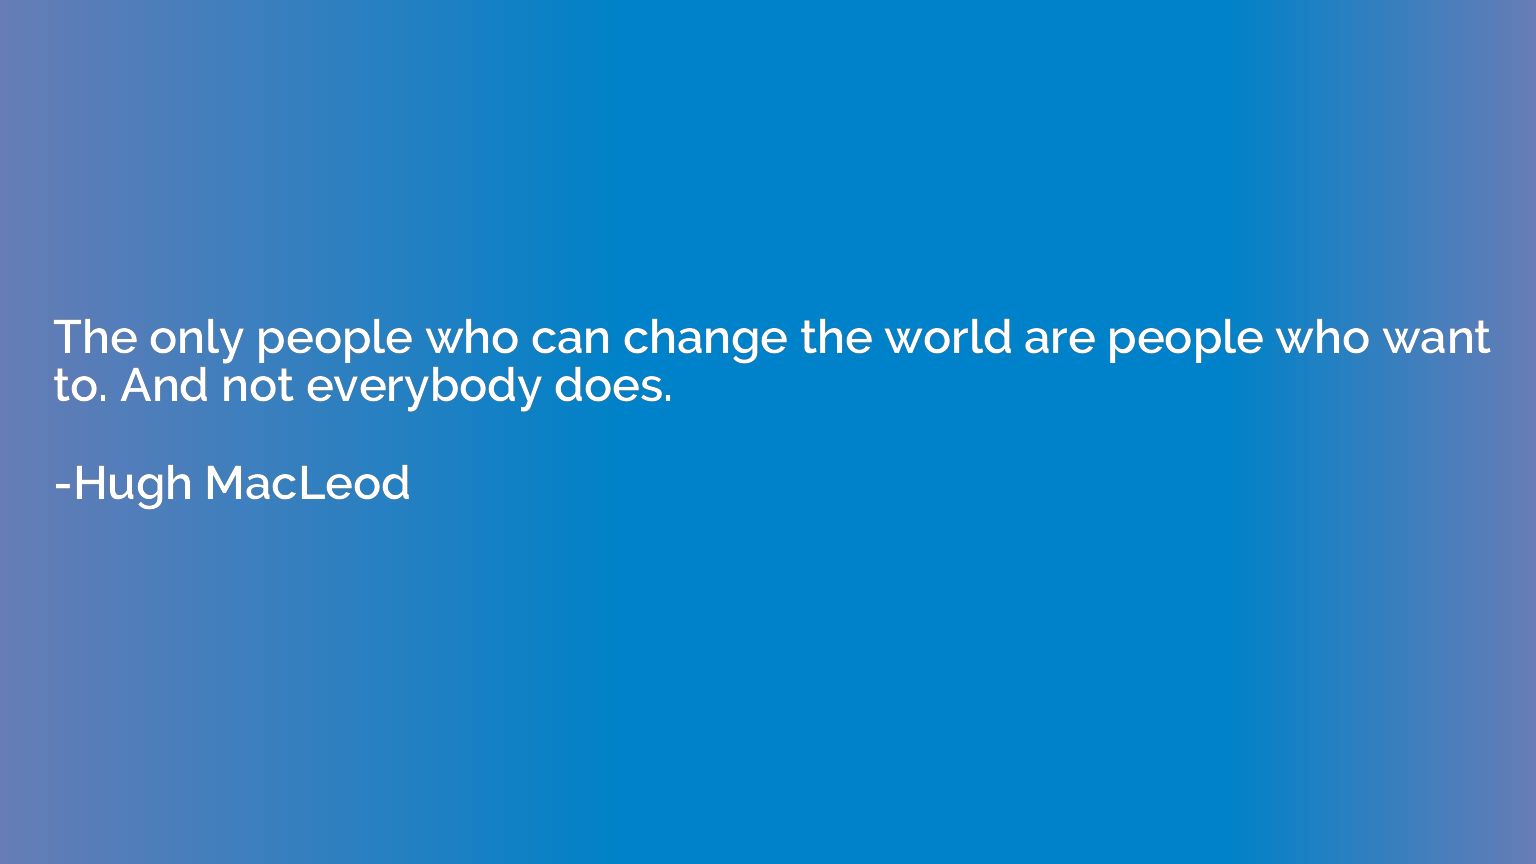 The only people who can change the world are people who want